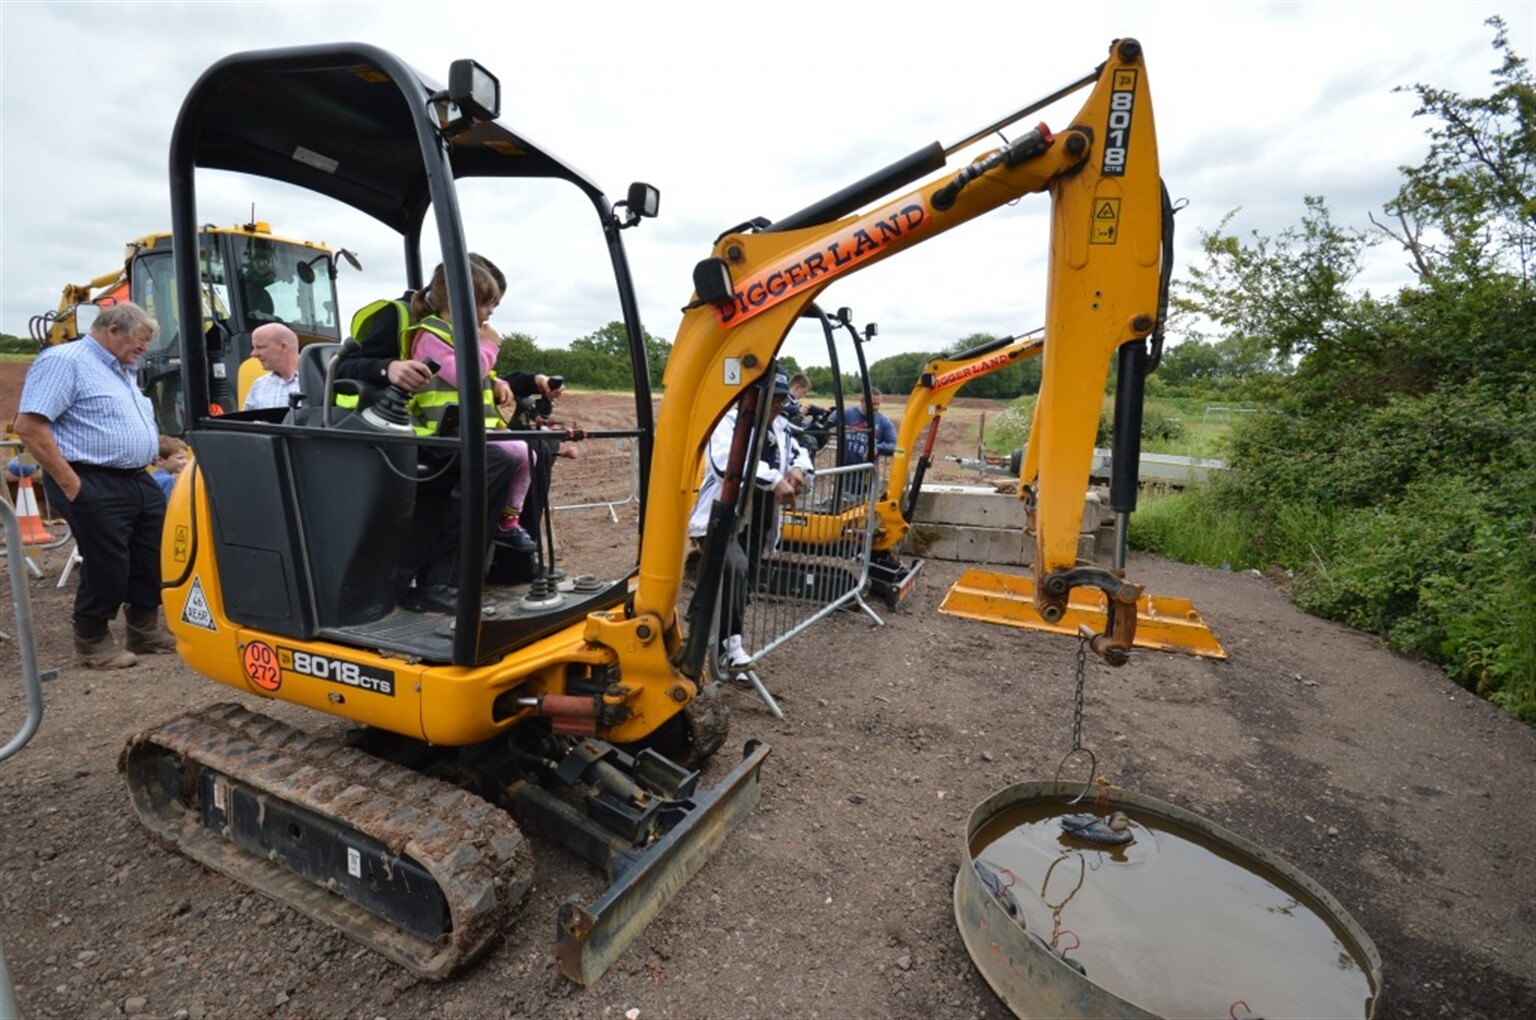 Diggers Demo Expo Experience (Part Two)